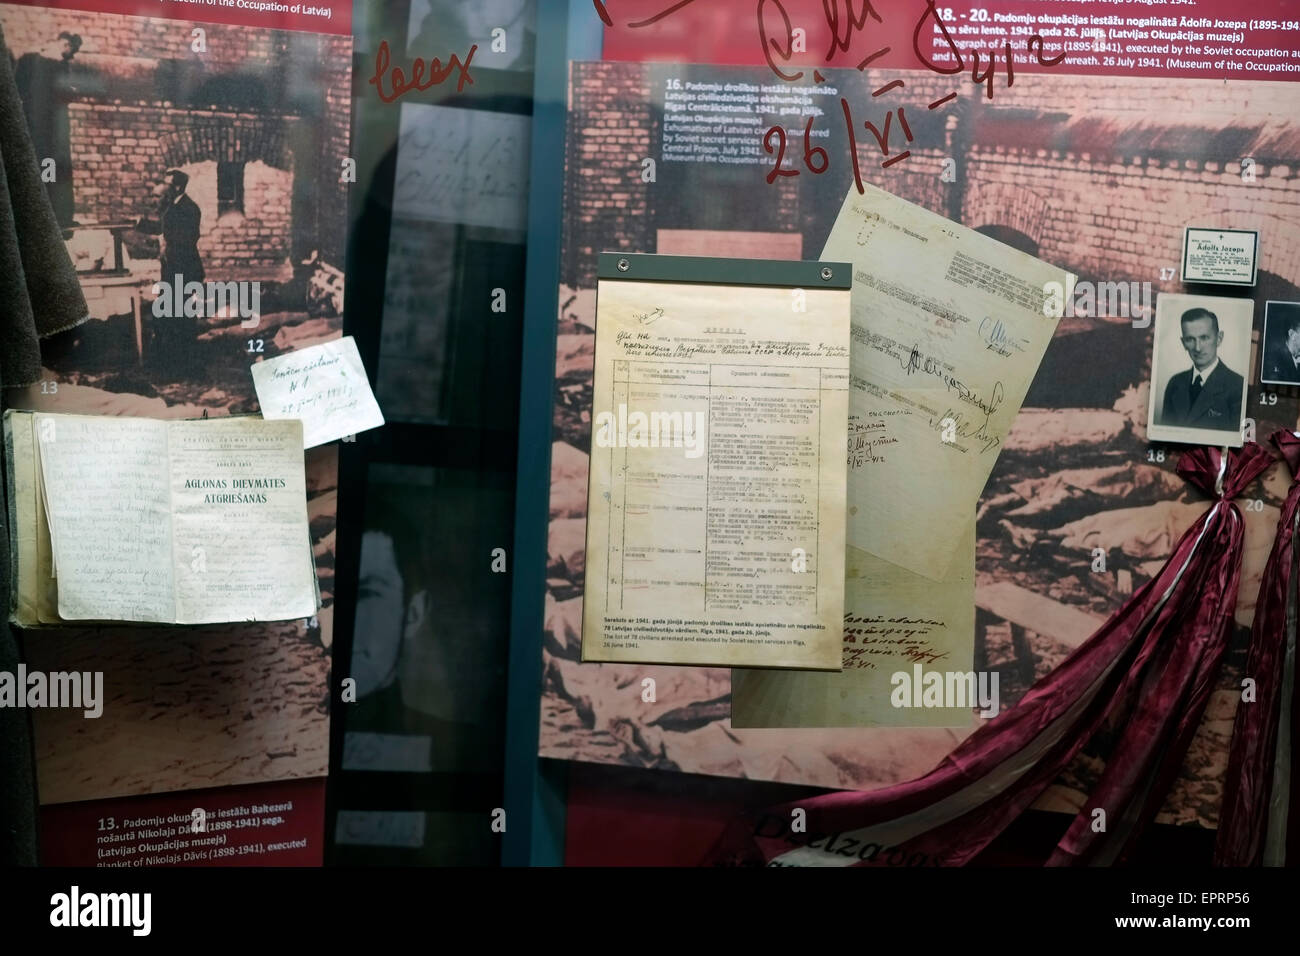 Documents displayed at the Museum of the Occupation of Latvia a historic educational institution established in 1993 to exhibit artifacts, archive documents, and educate the public about the 51-year period in the 20th century when Latvia was successively occupied by the USSR in 1940–1941, then by Nazi Germany in 1941–1944, and then again by the USSR in 1944–1991 located in the city of Riga capital of Republic of Latvia Stock Photo